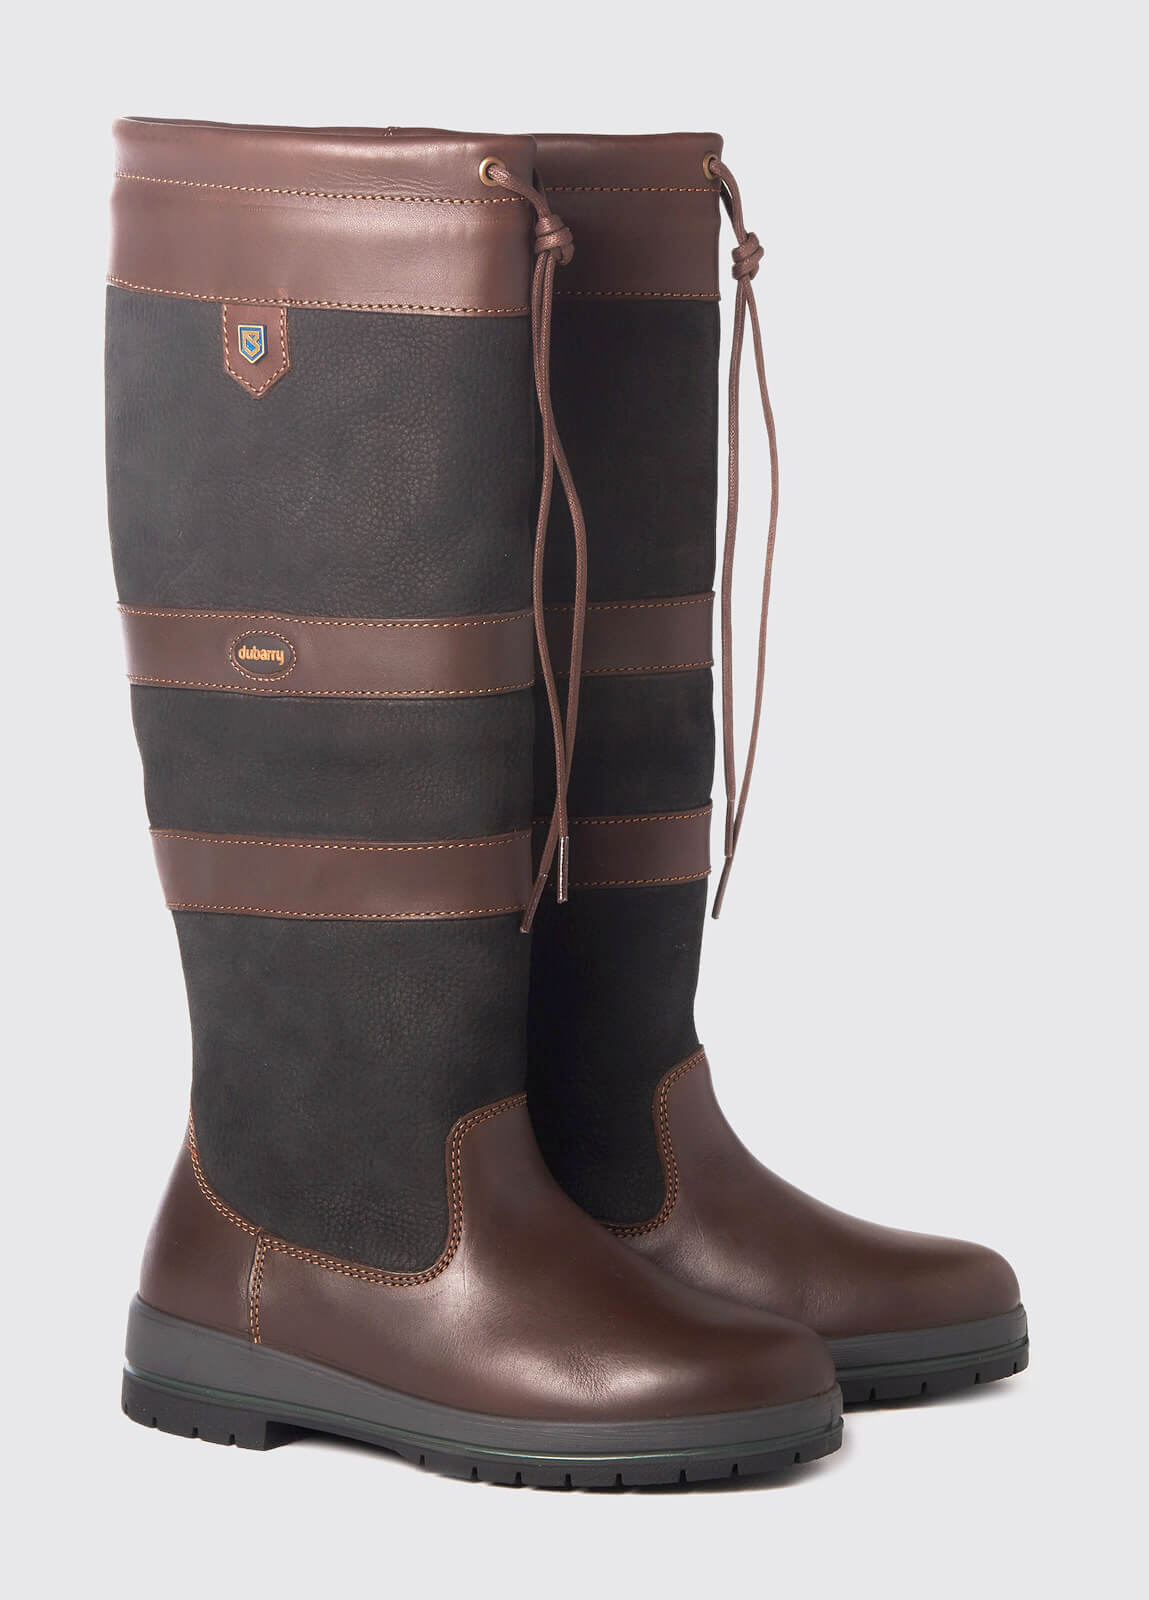 Dubarry Womens Galway Country Boot - Black/Brown